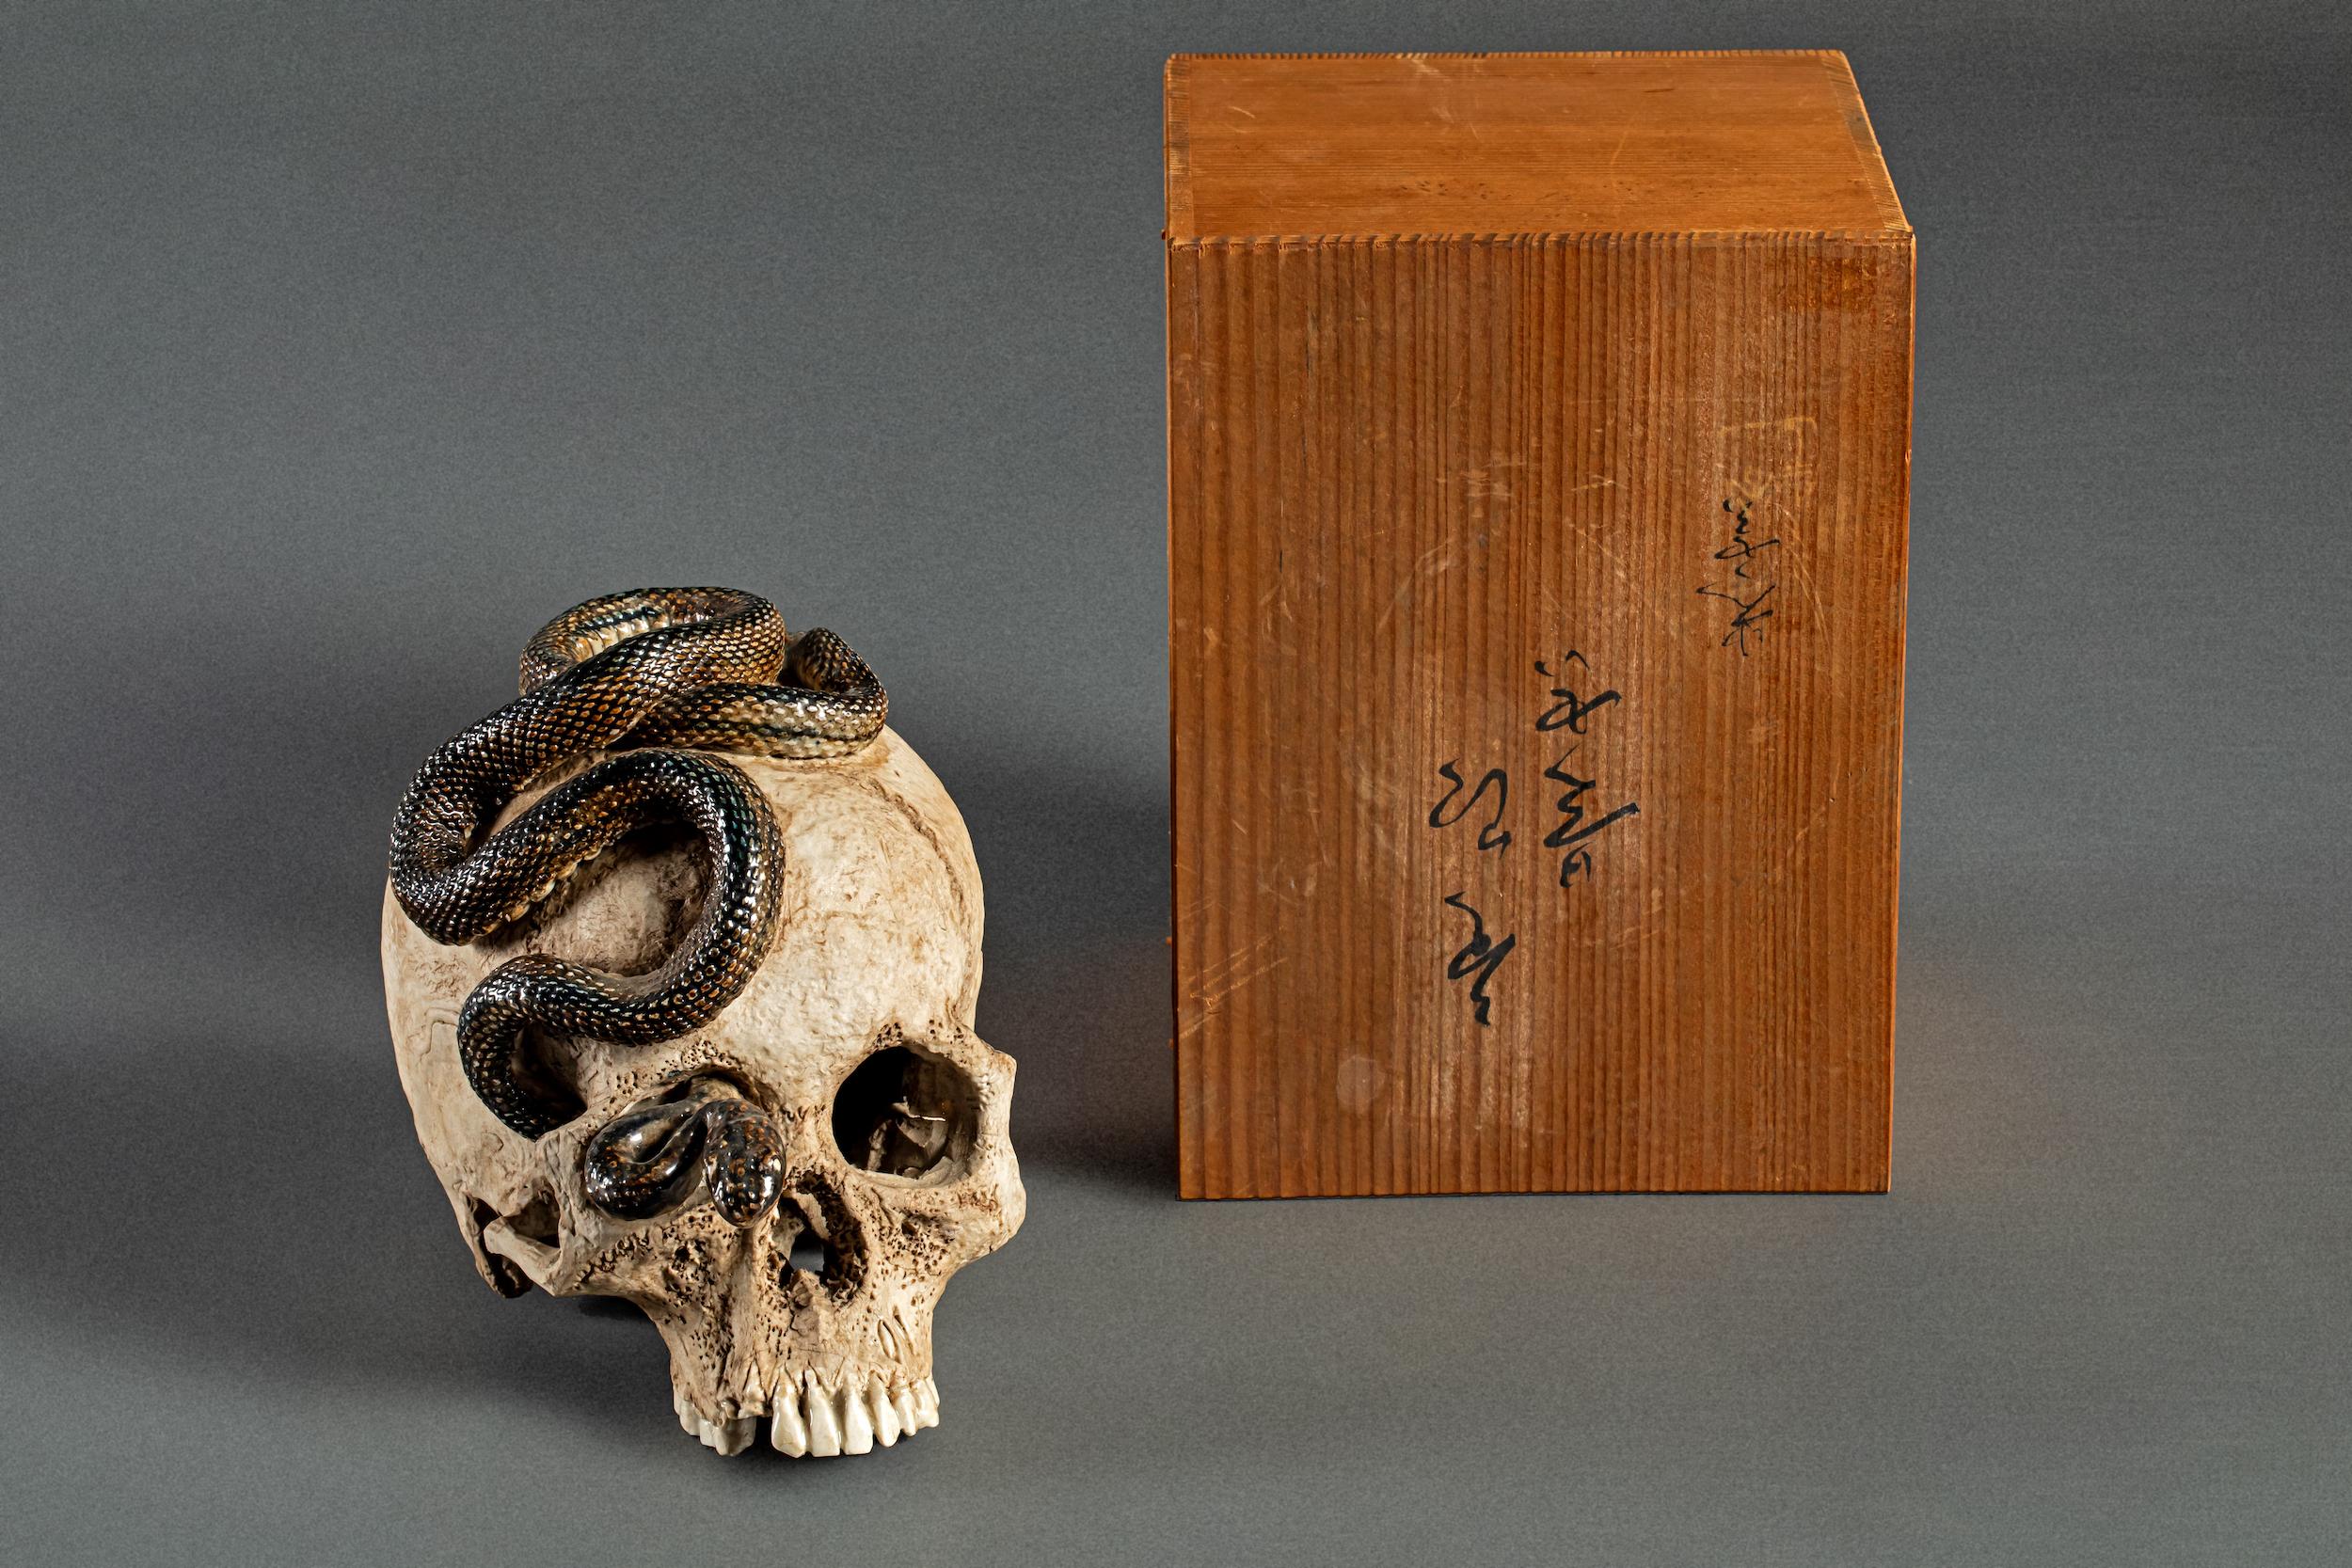 Japanese Ceramic Form of a Human Skull with a Snake For Sale 10